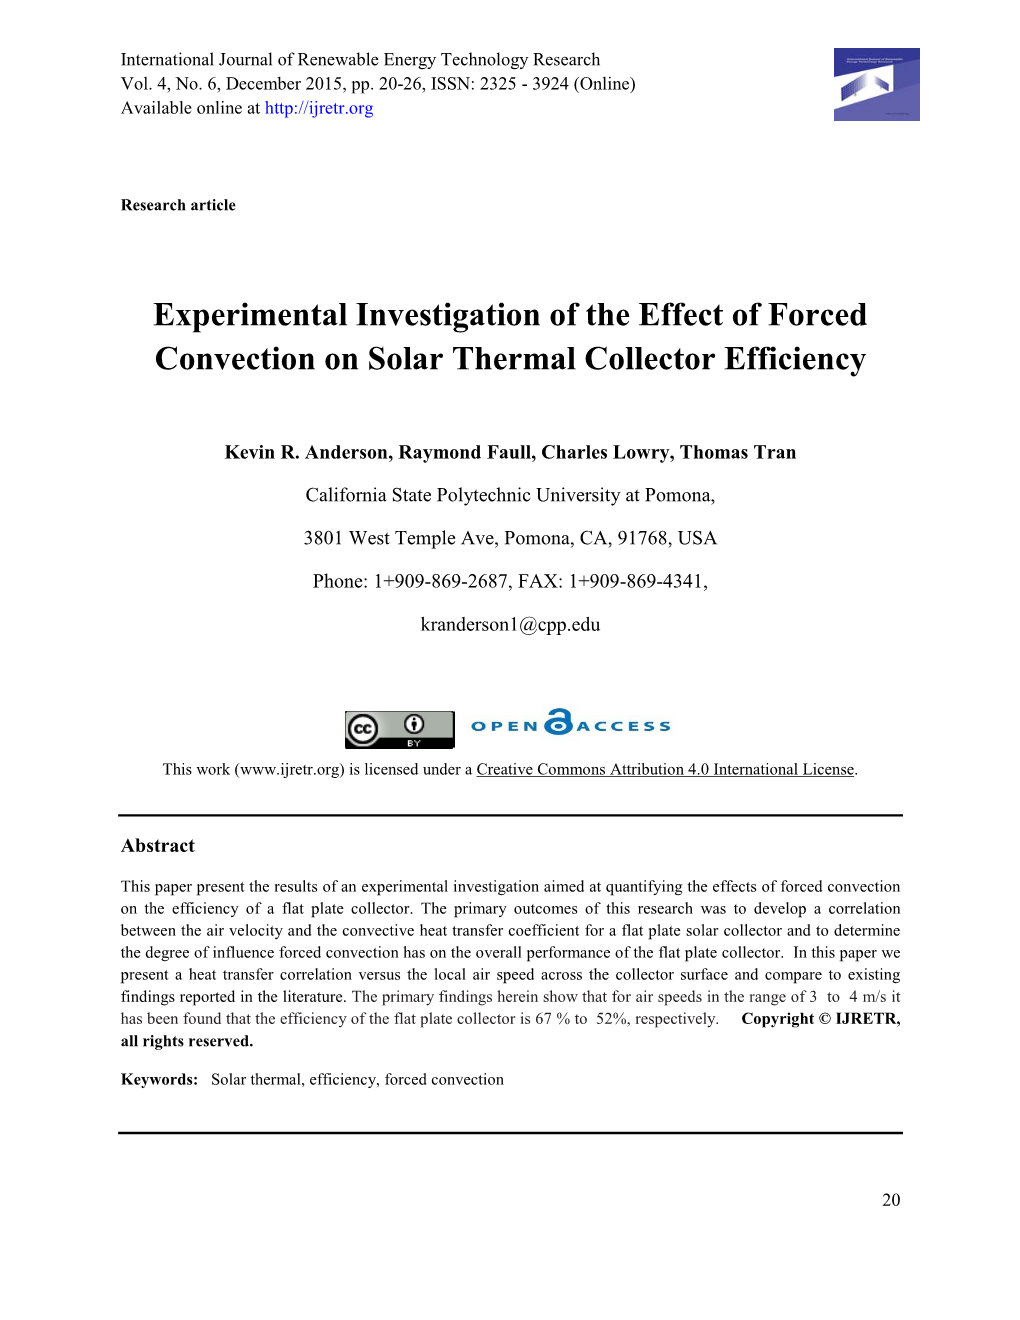 Experimental Investigation of the Effect of Forced Convection on Solar Thermal Collector Efficiency